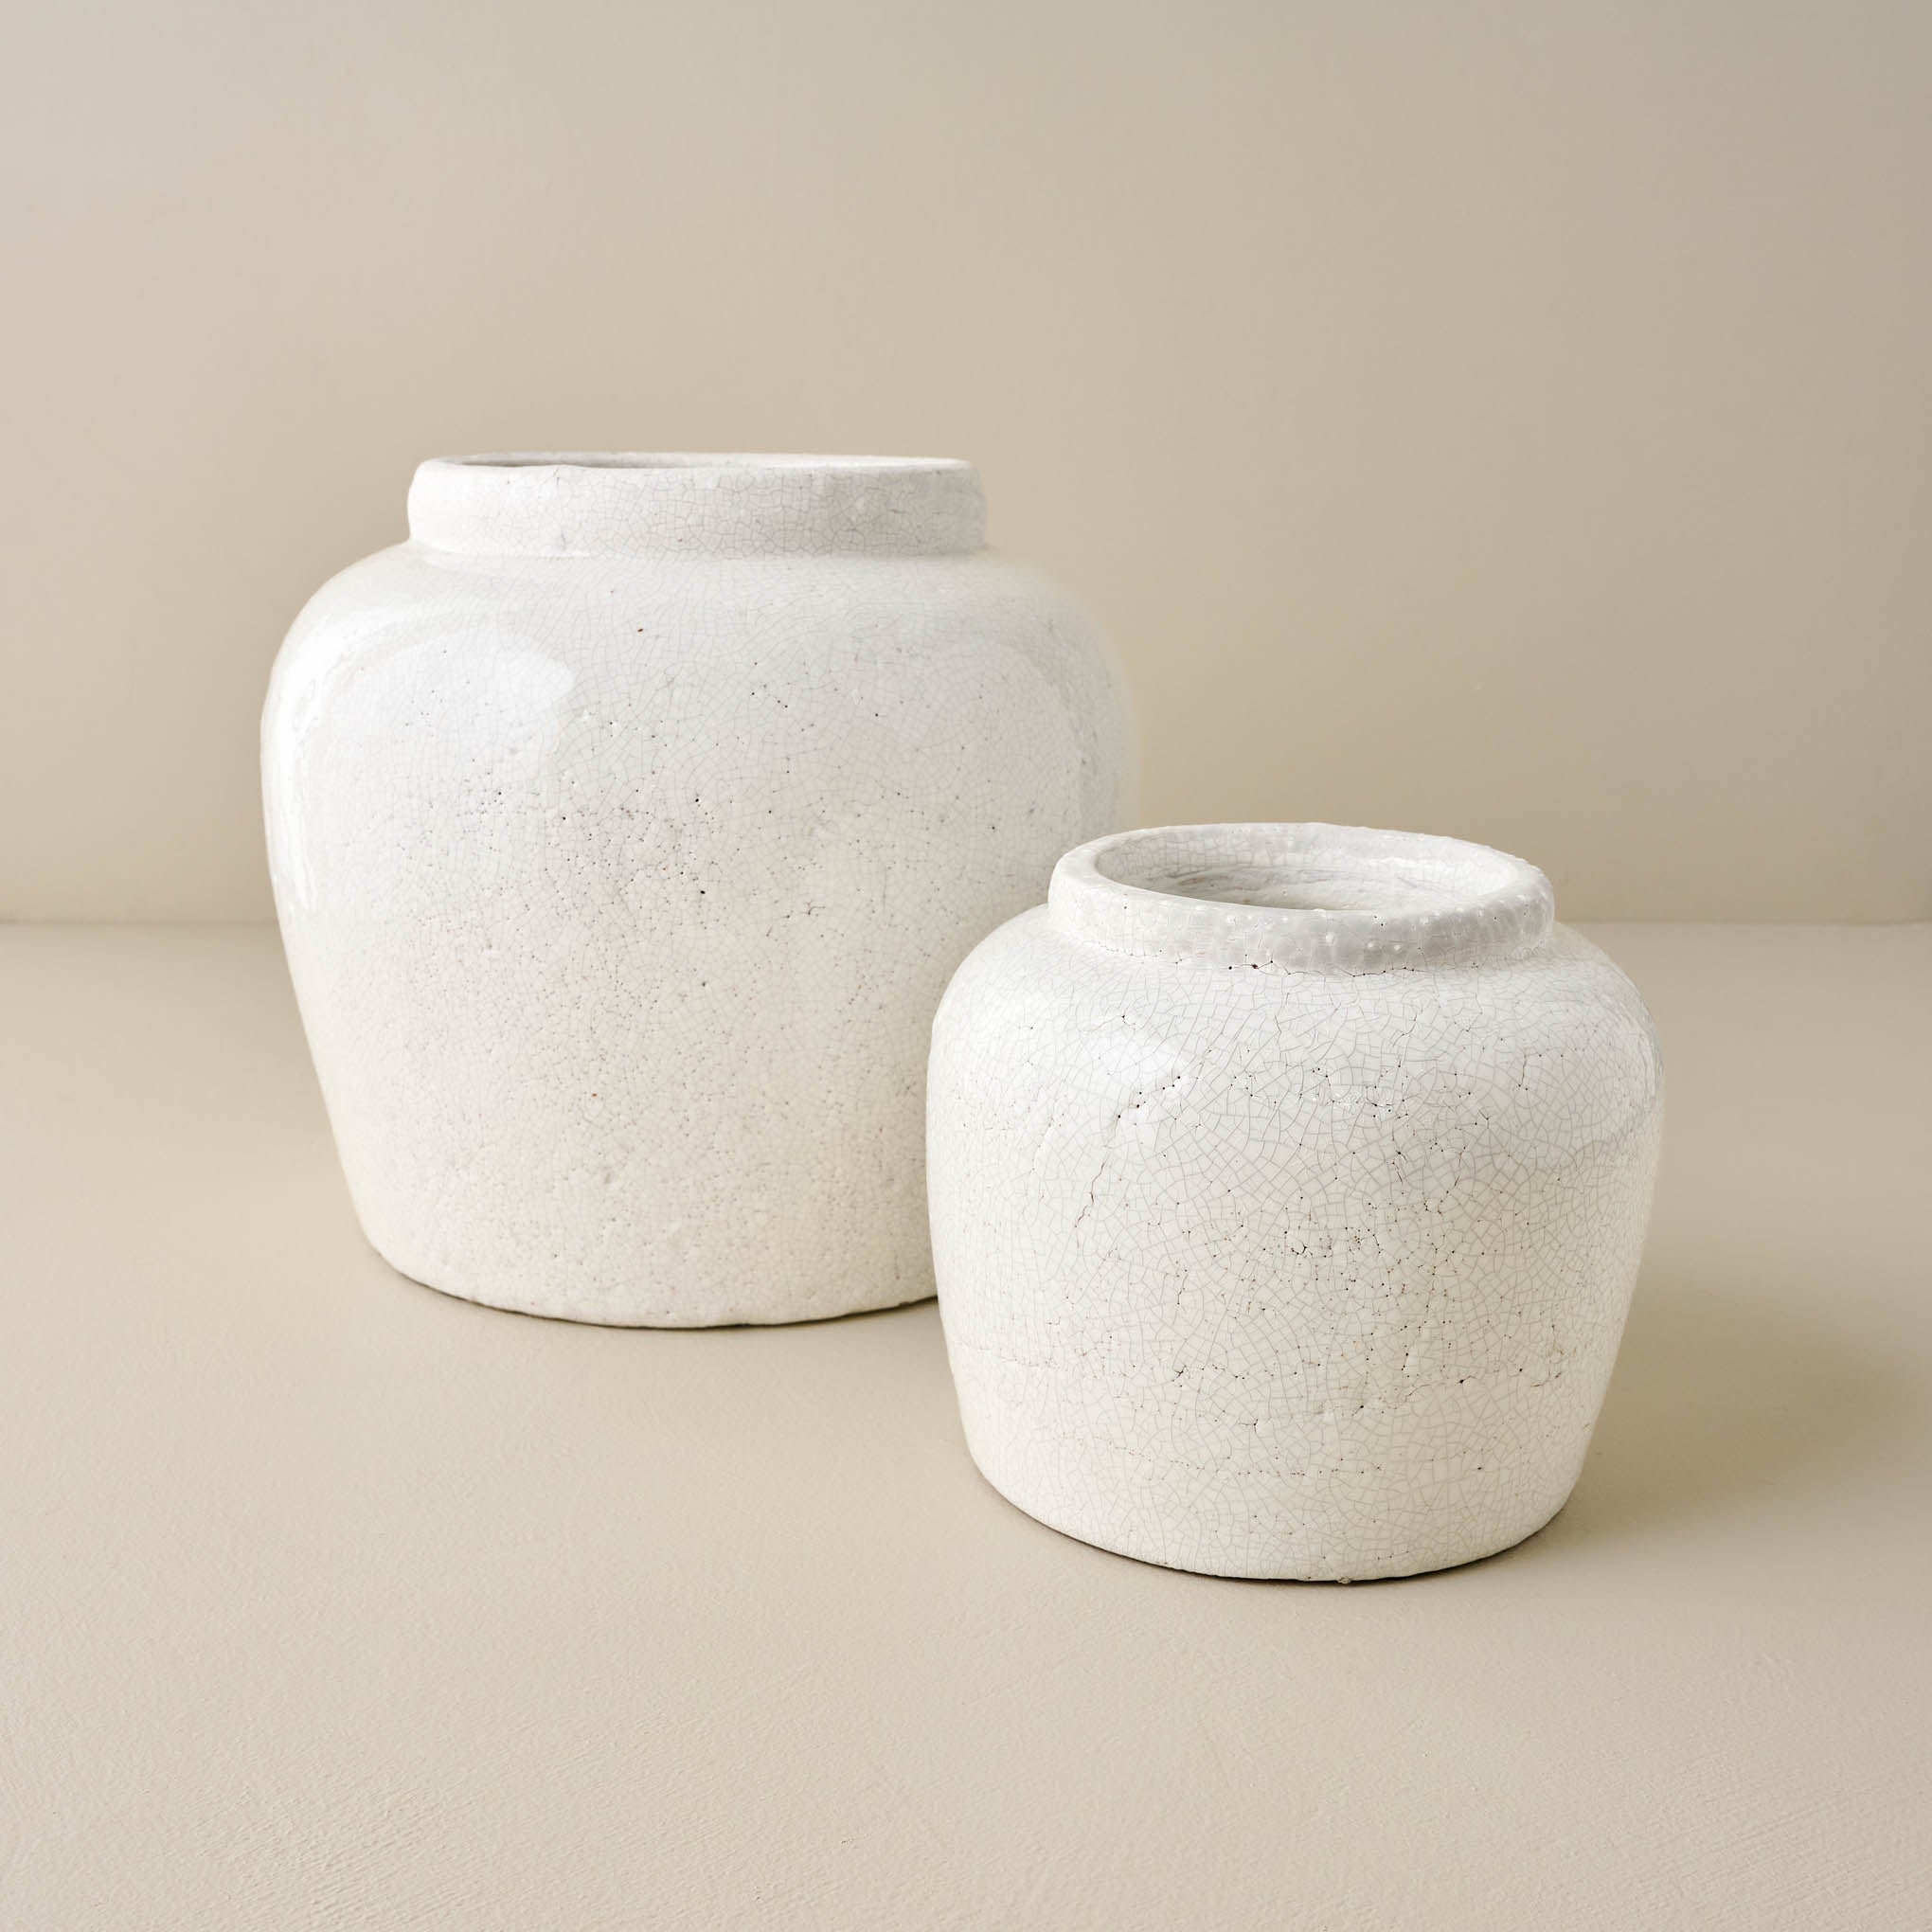 Rebecca Crackle Ceramic Vase in small and large size Items range from $30.00 to $90.00